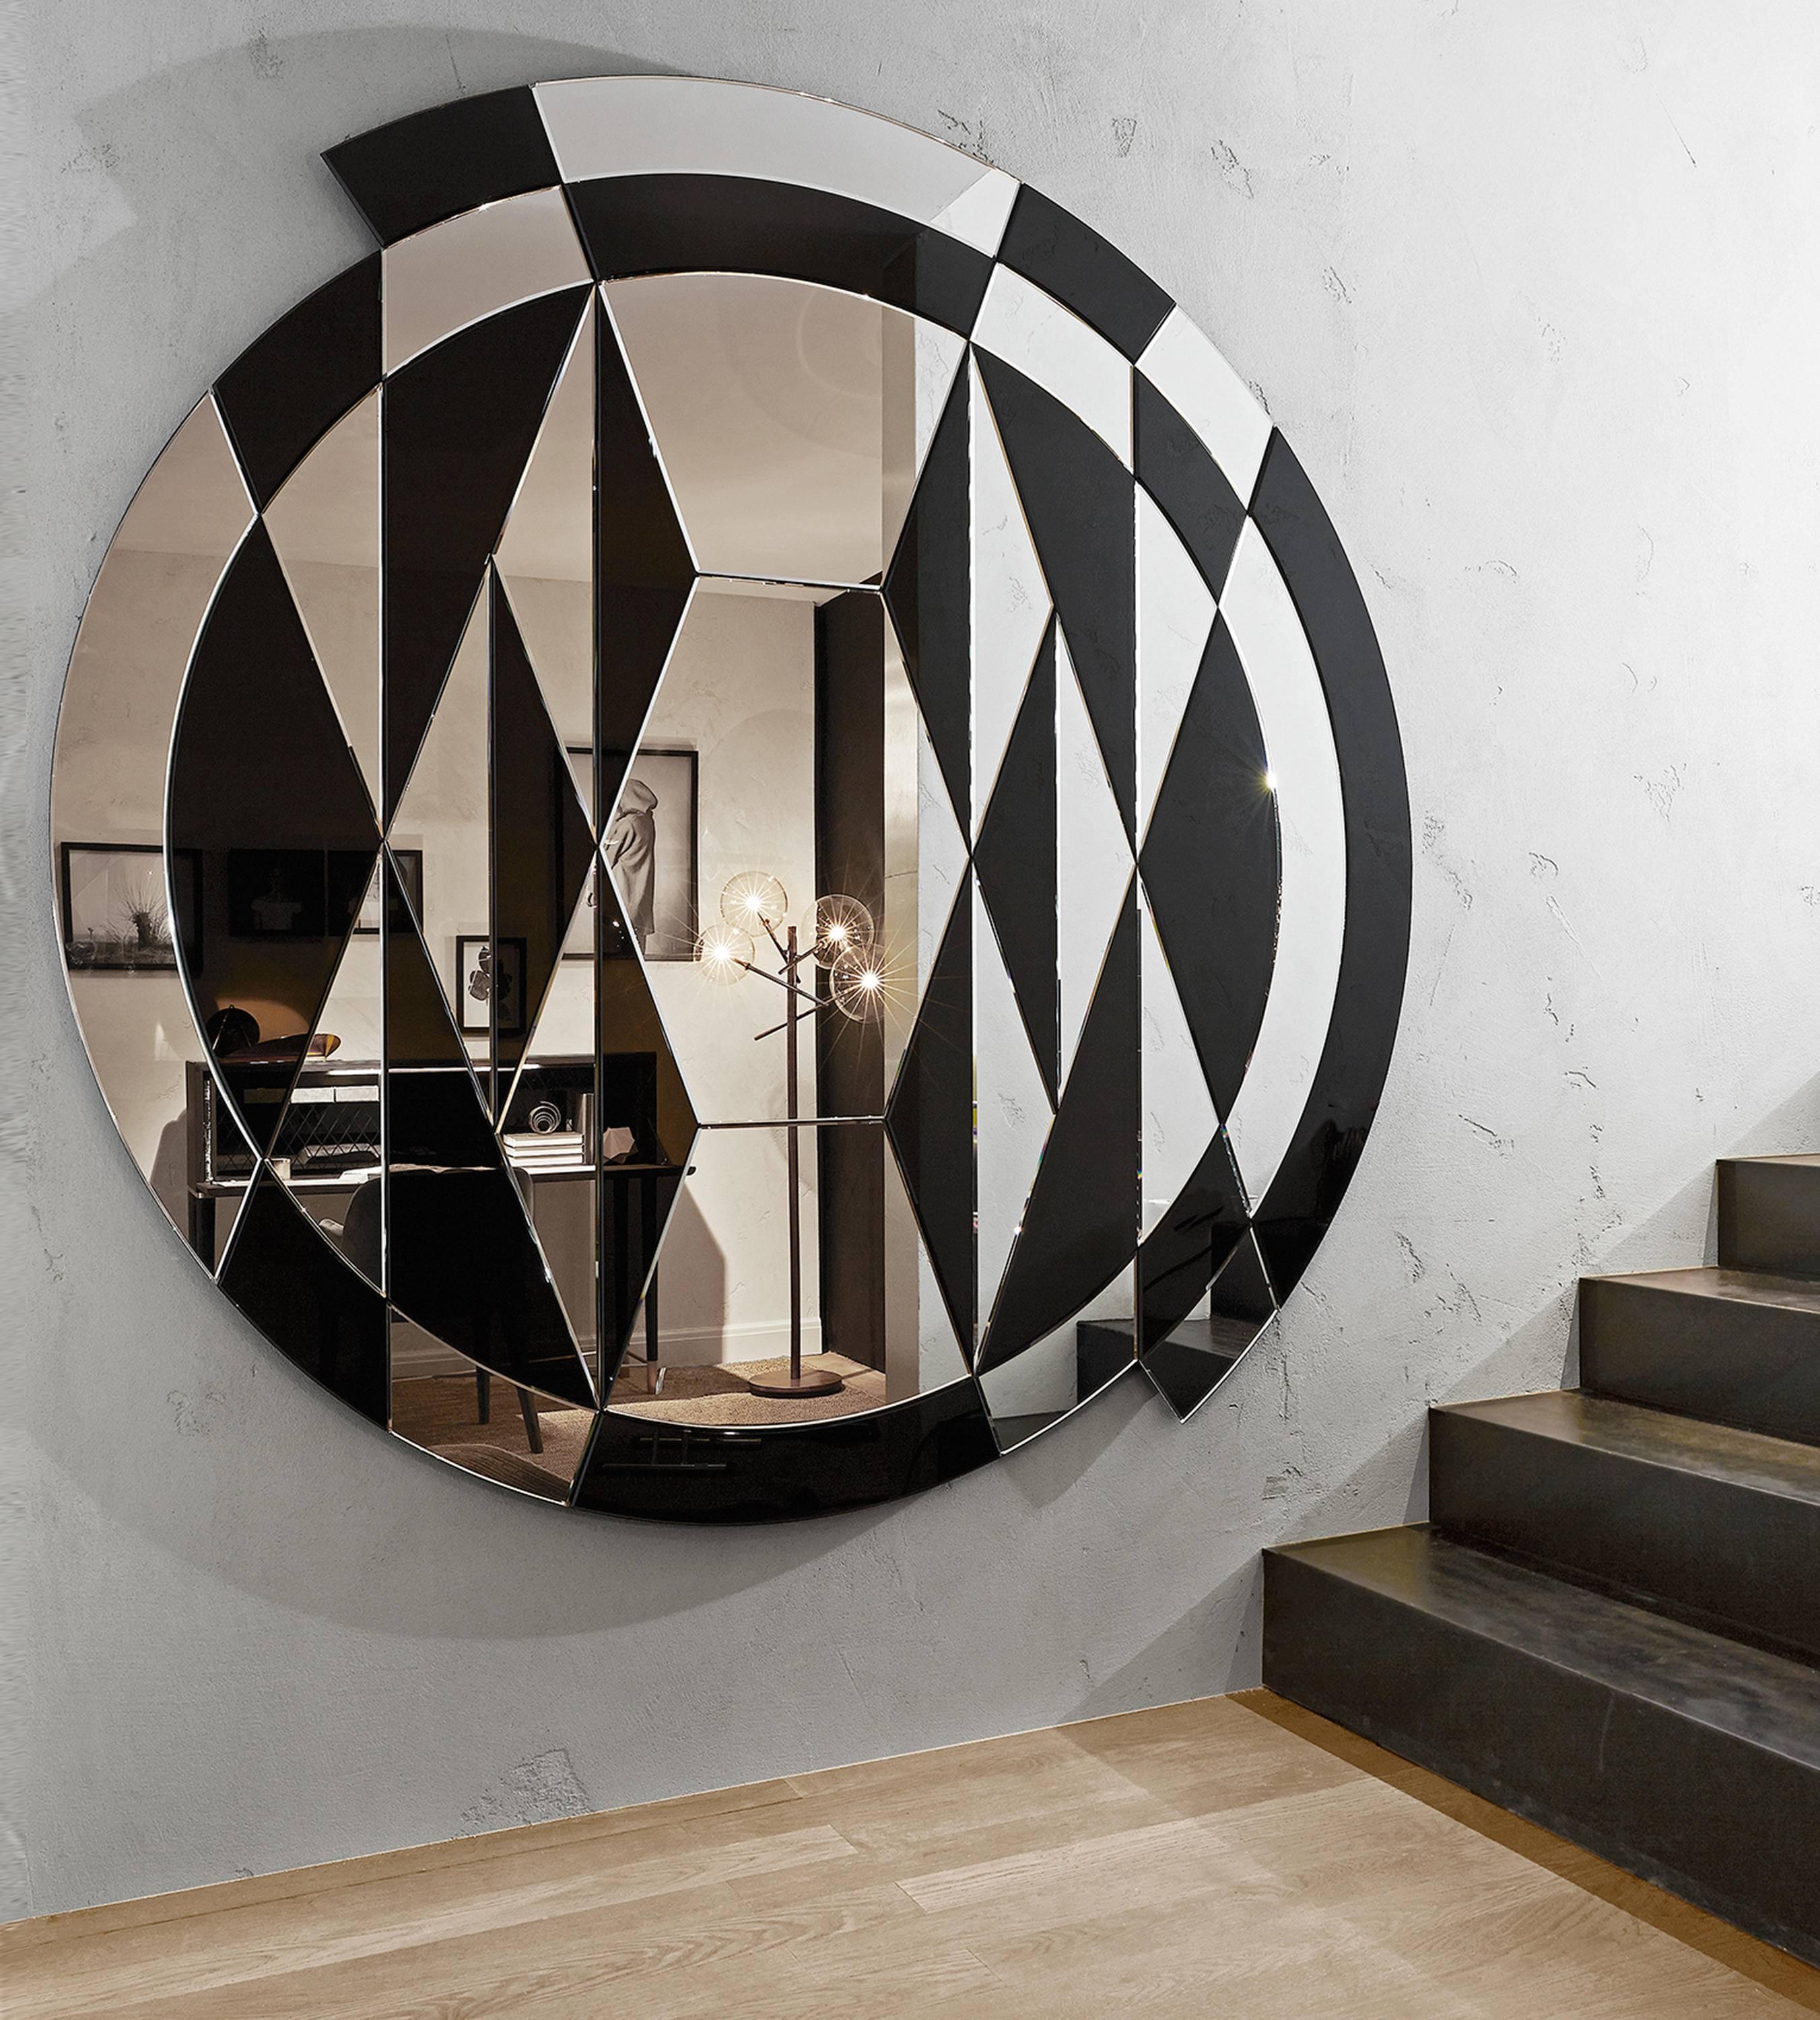 Beat Mirror by Pietro Rossi for Gallotti and Radice in Black and Bevelled Mirror. 

Mirror bevelled and polished by hand, bright black painted glass inserts. Made of 42 single sections.
Special limited edition.